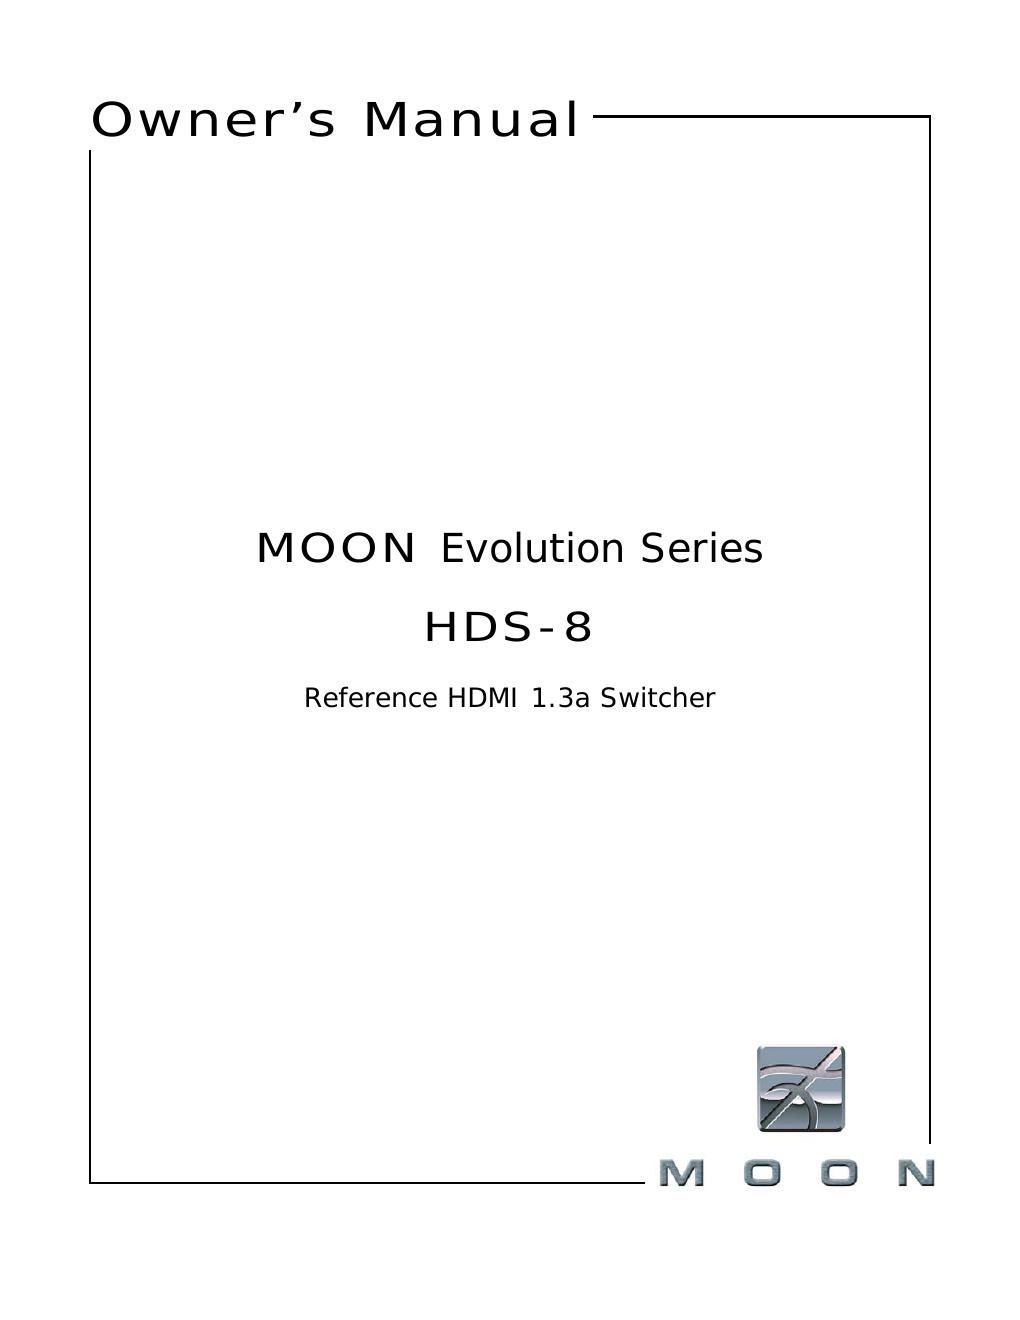 moon hds 8 owners manual